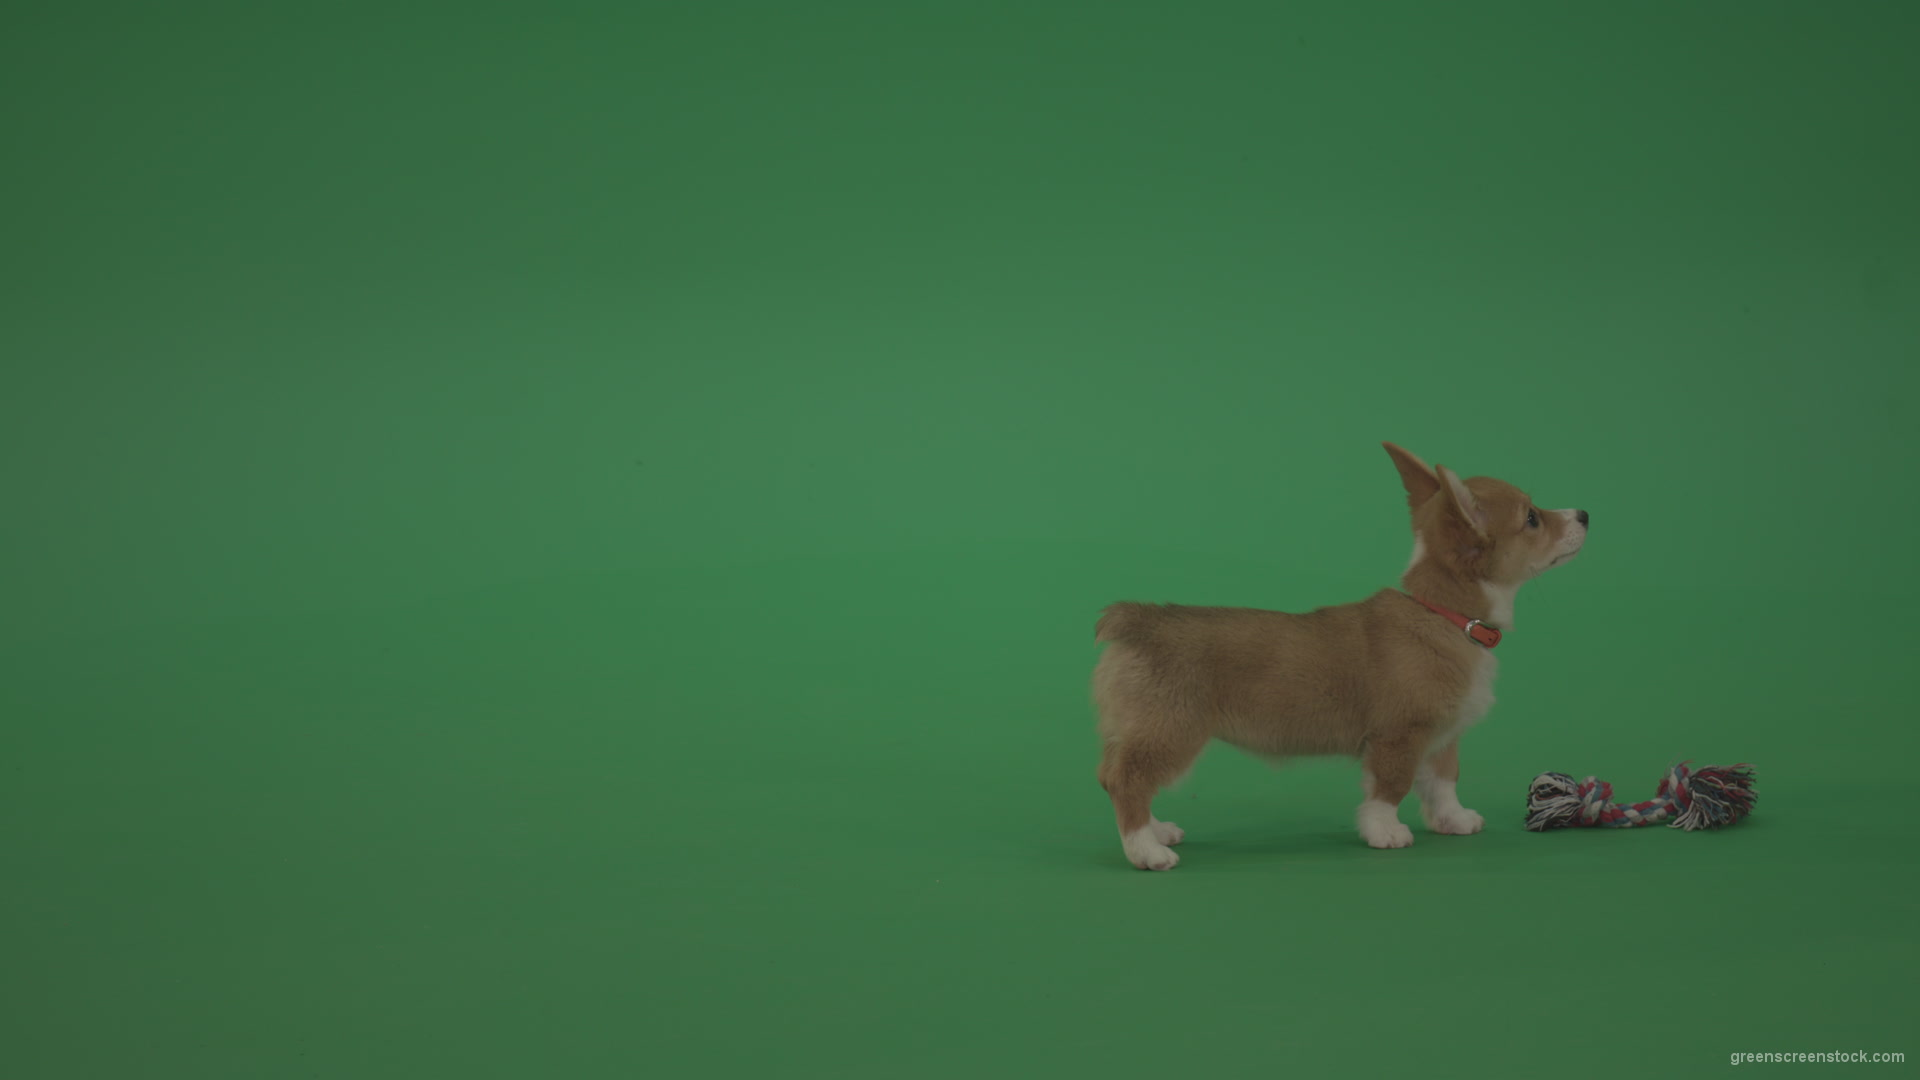 Small-toy-Korgi-welsh-dog-play-with-doll-on-green-screen-isolated_006 Green Screen Stock